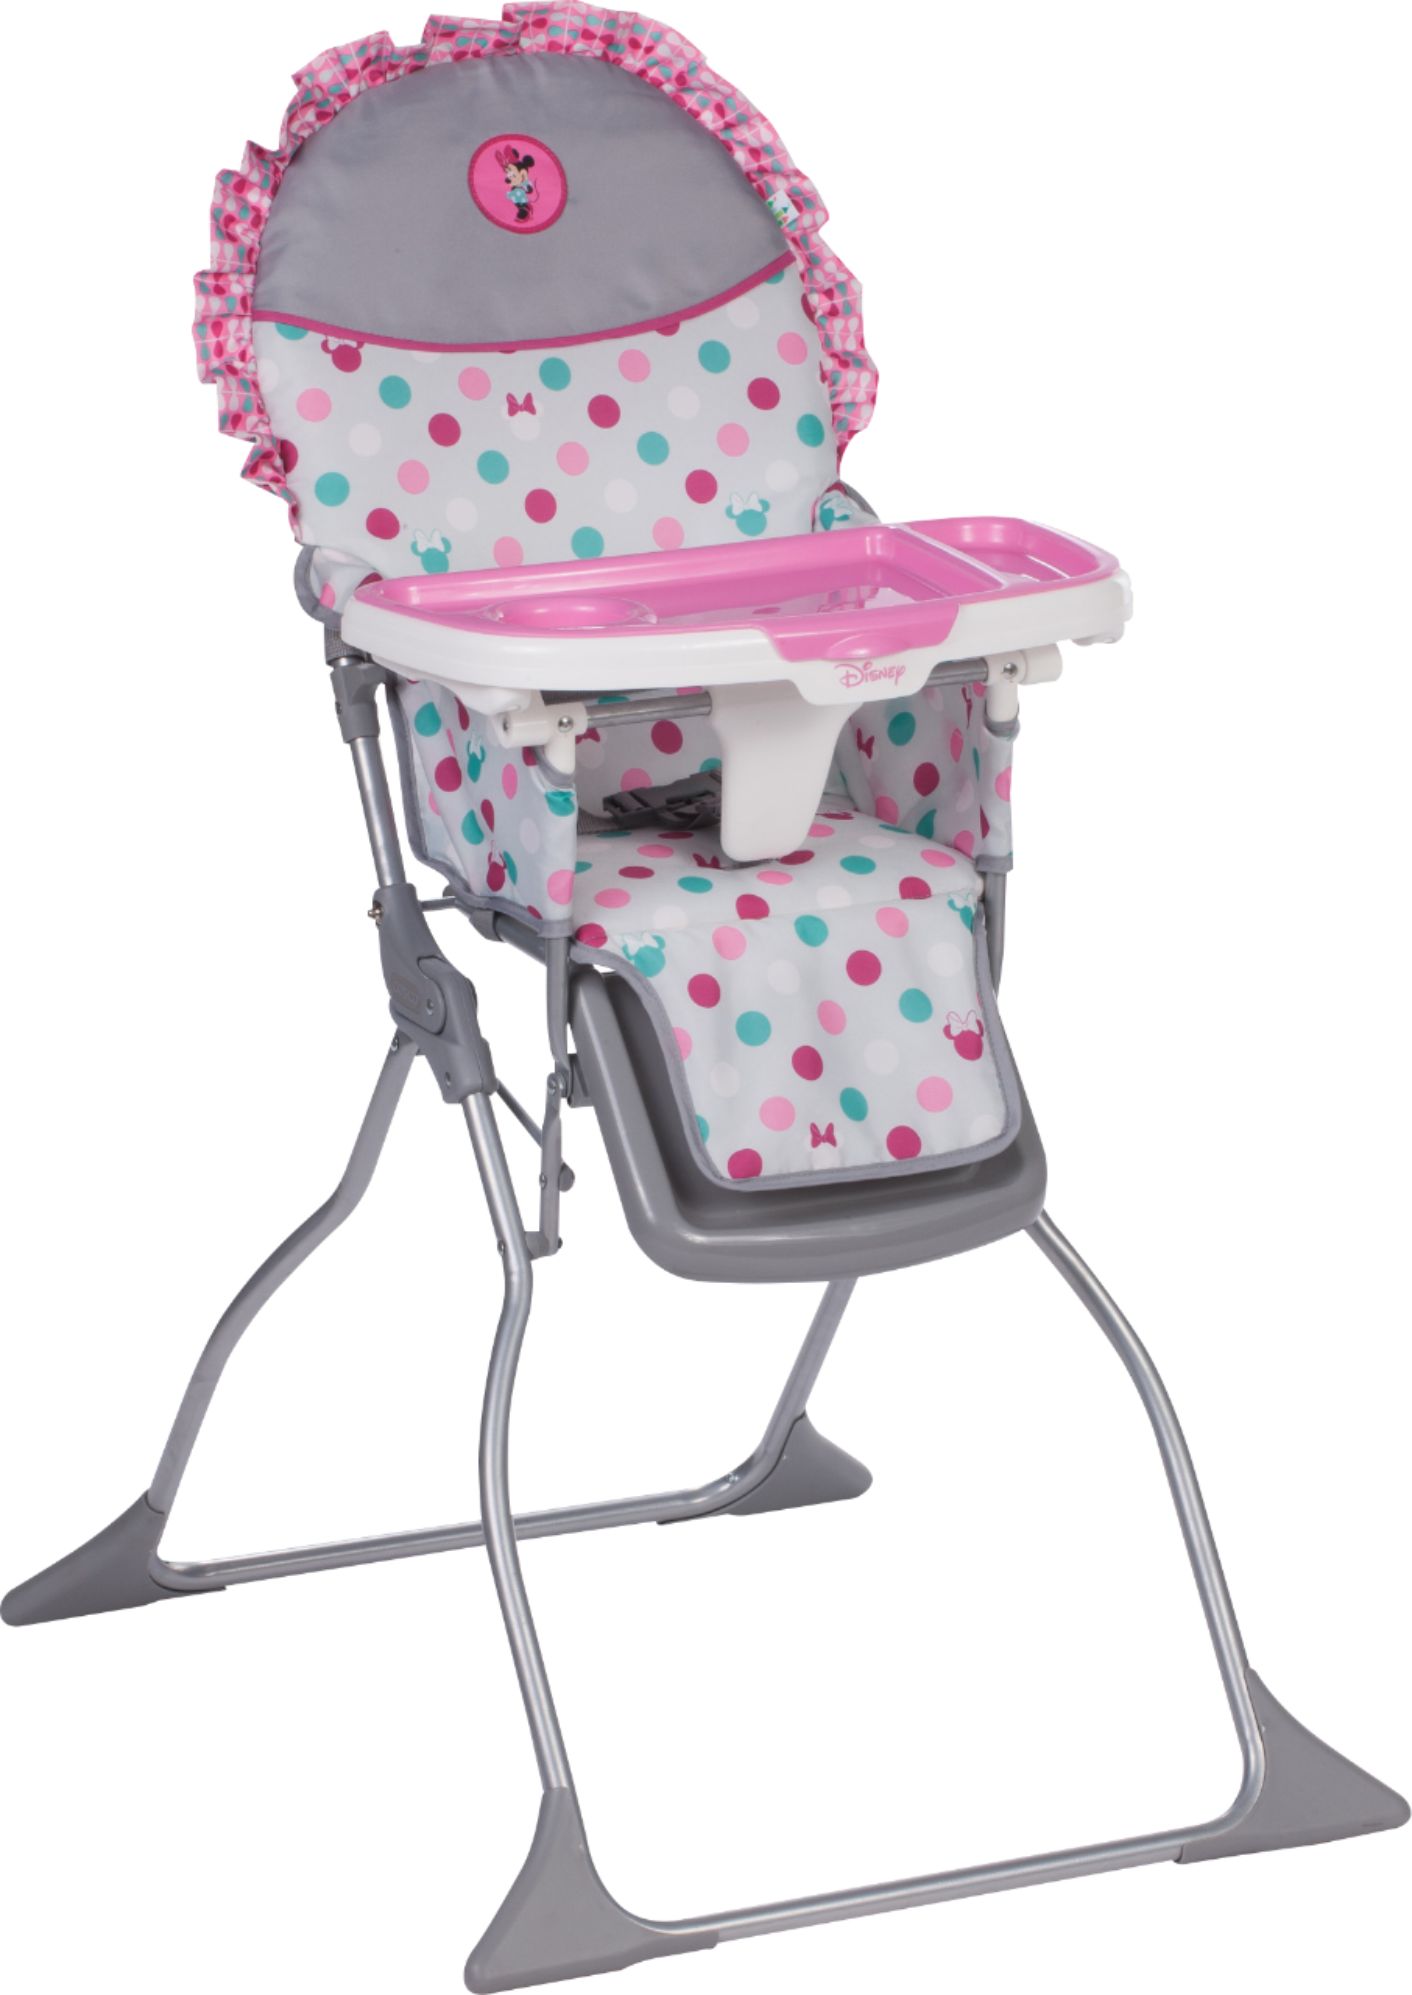 Angle View: Disney - Simple Fold™ Plus High Chair - Pink